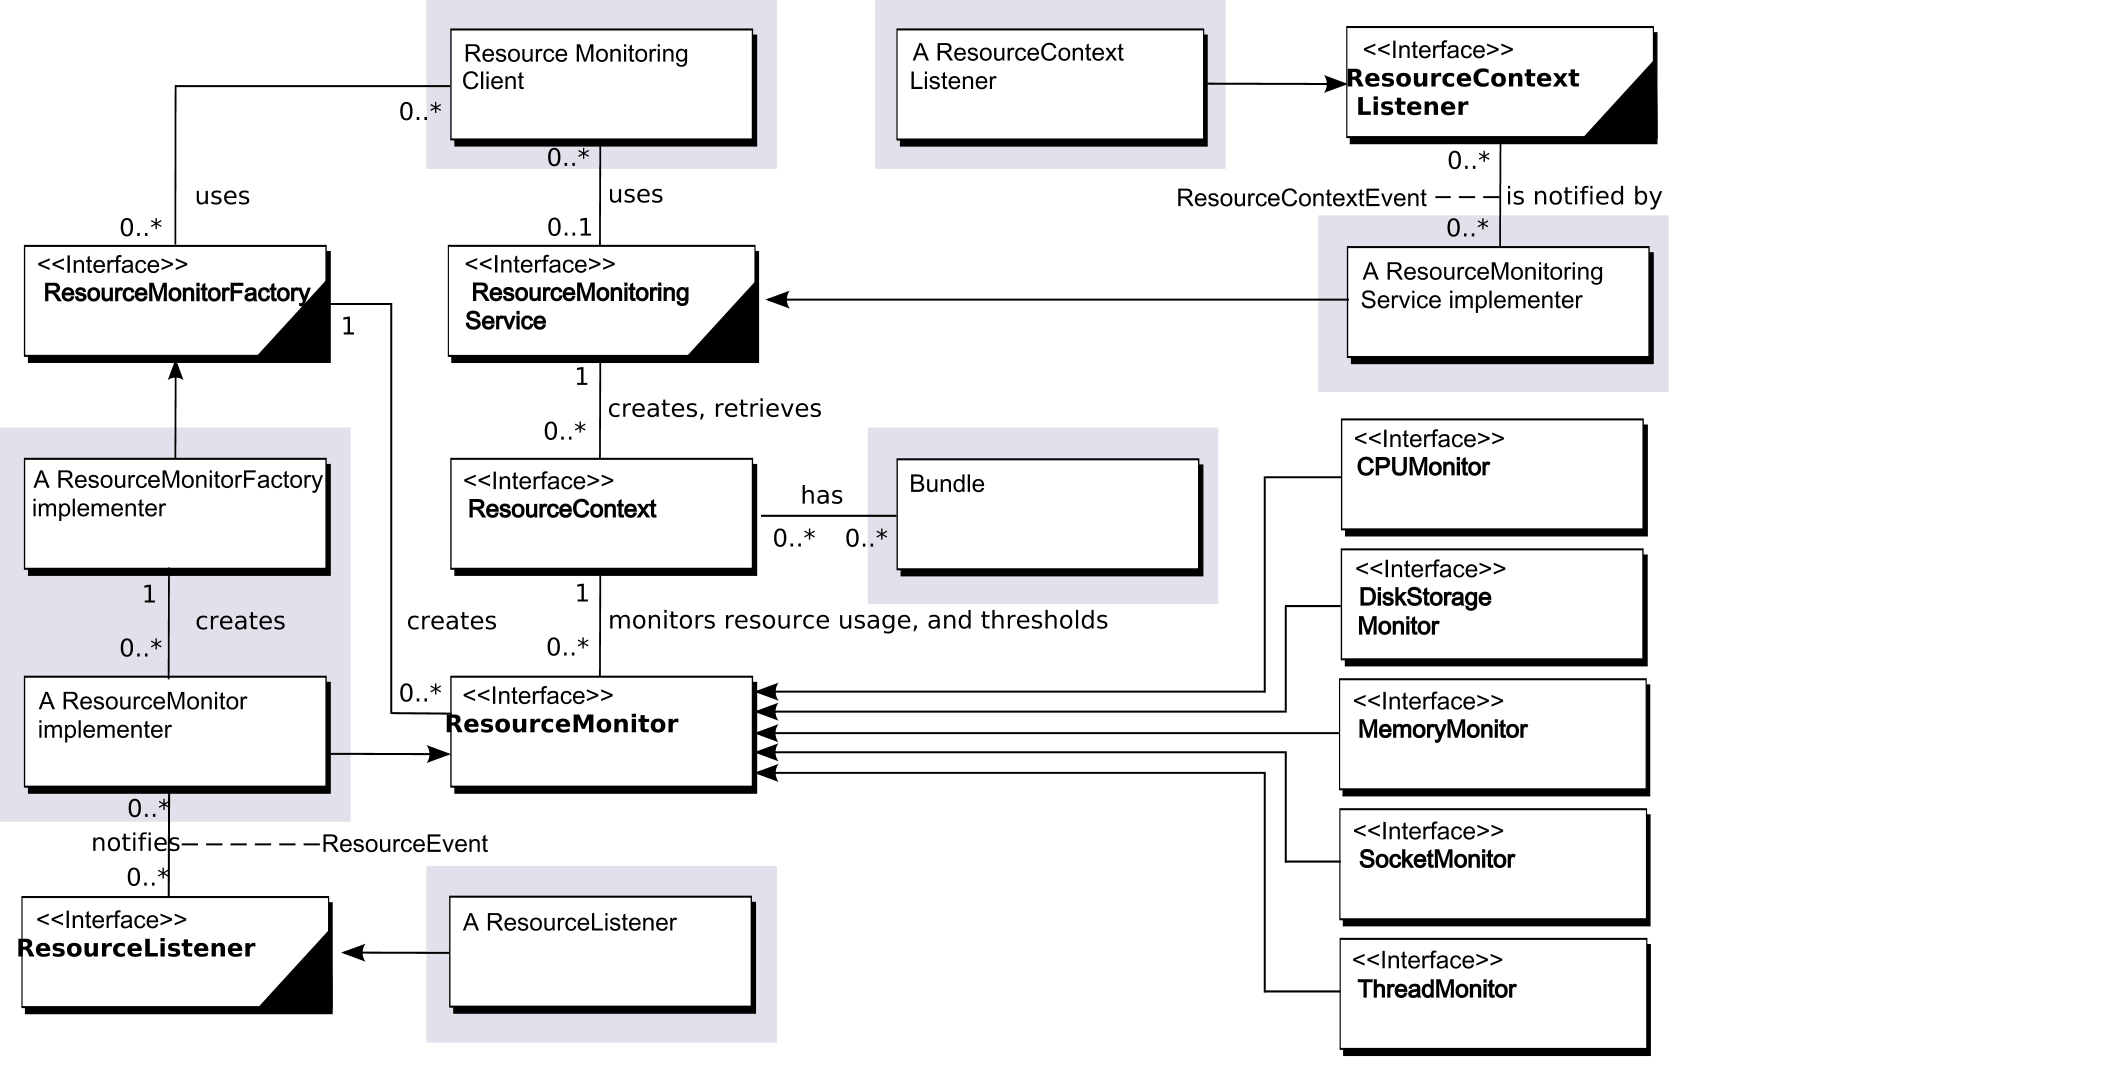 Resource monitoring class diagram specification.